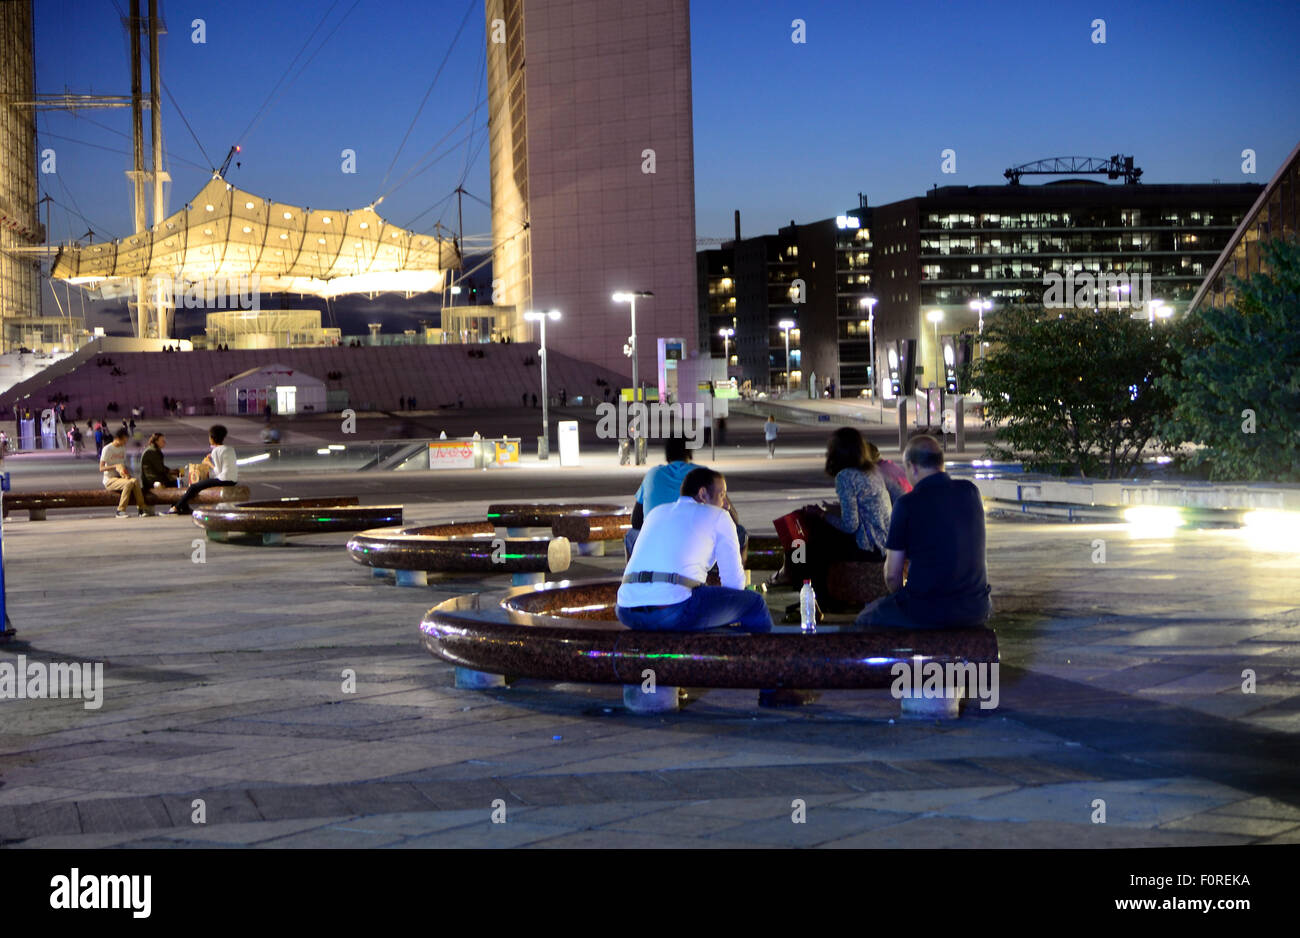 People sit on semicircular benches in the late evening underneath the Grand Arch at La Defense in Paris. Stock Photo